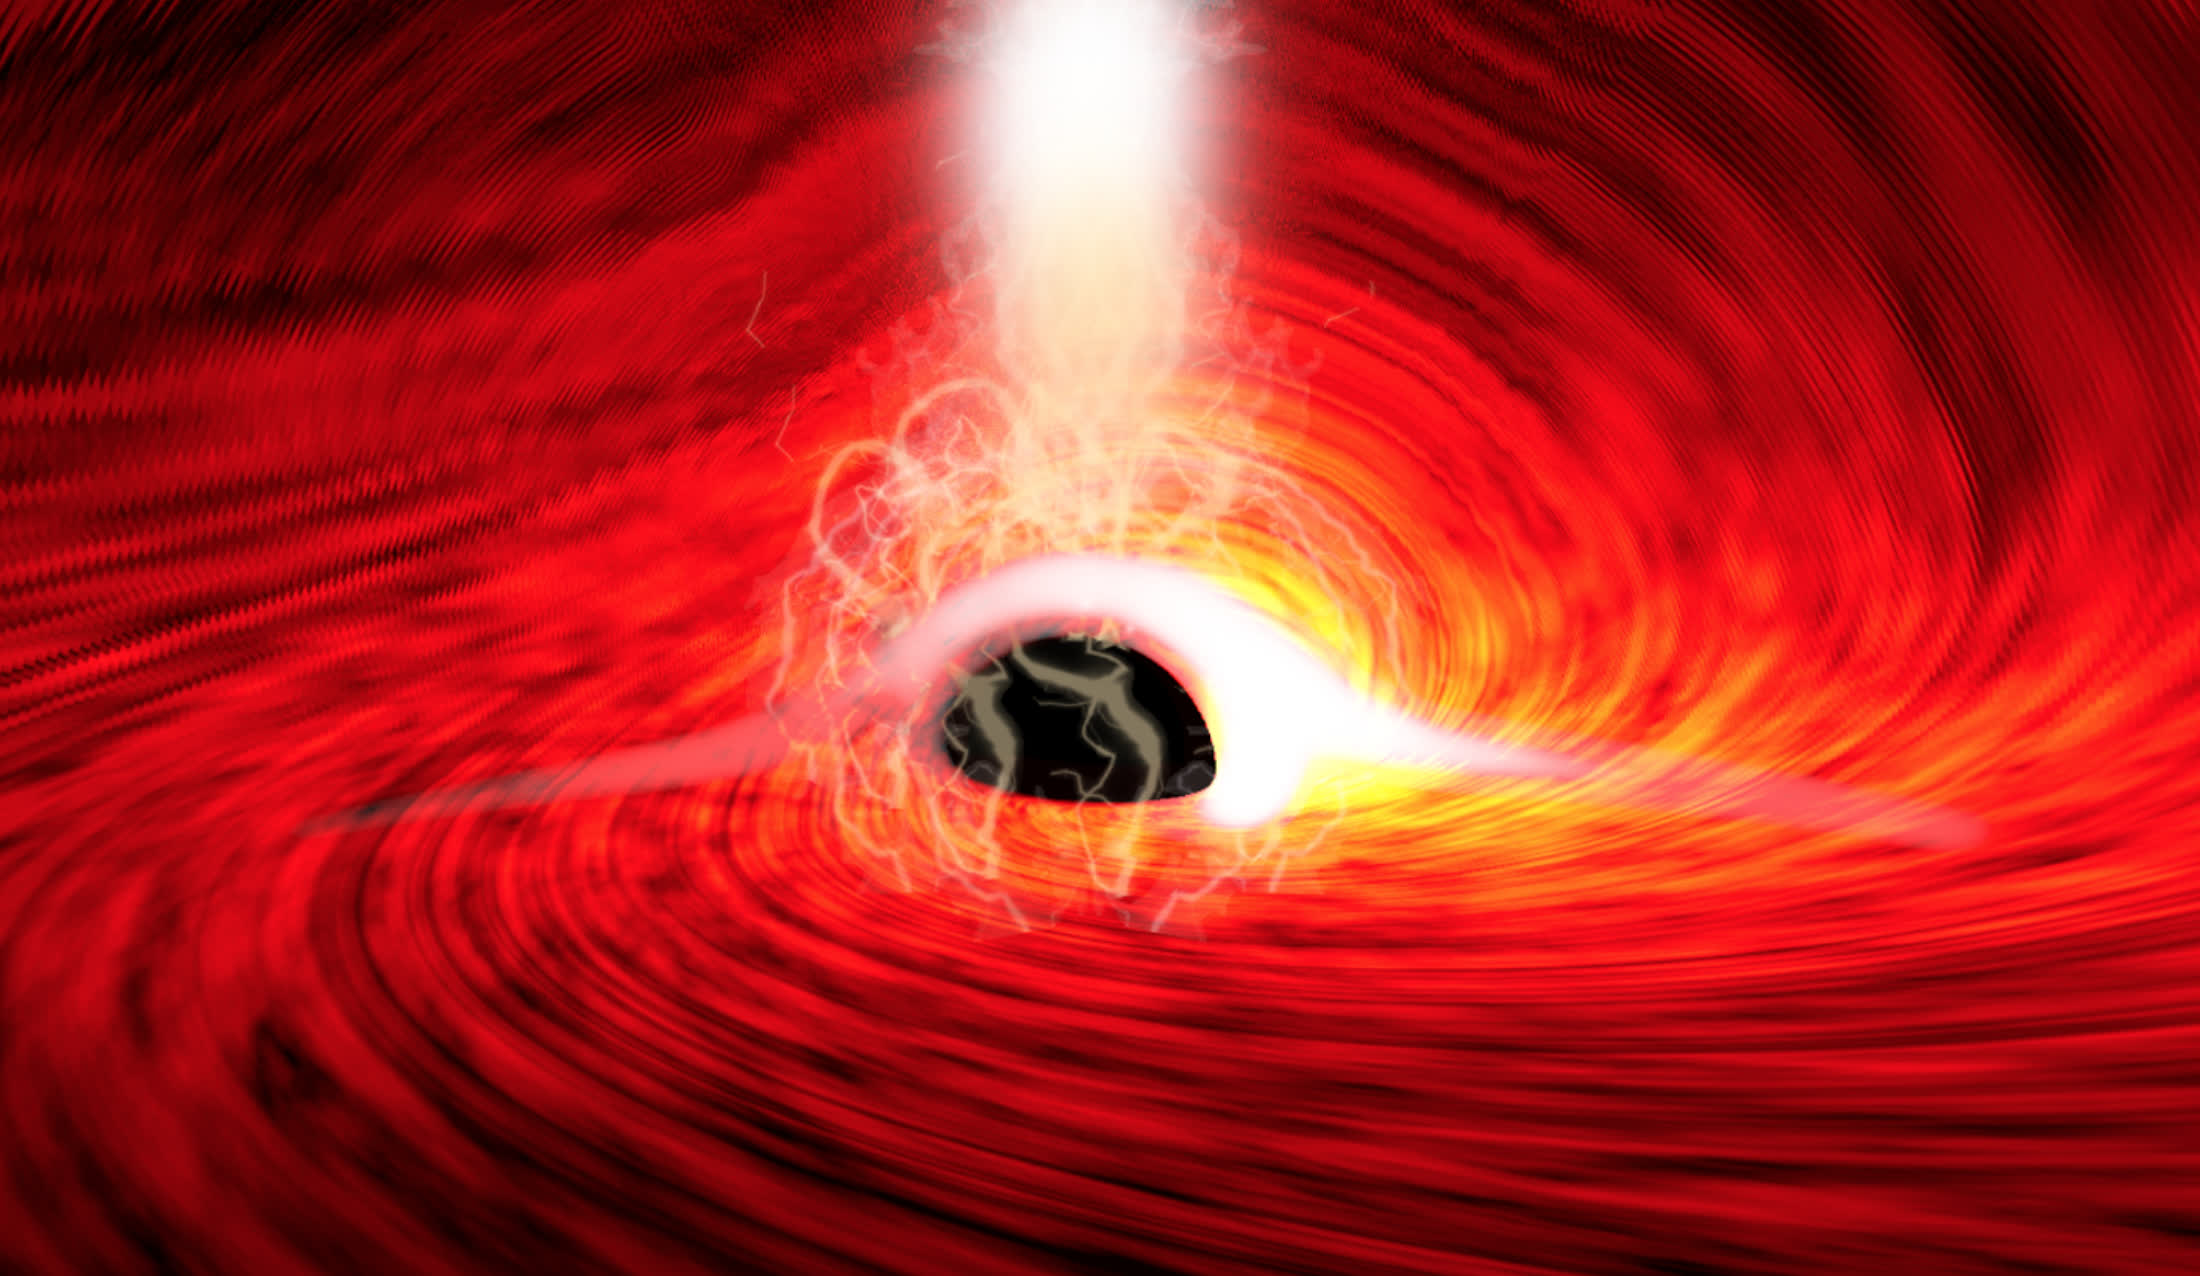 Astronomers spot light behind a black hole for the first time, reaffirming Einstein's theory of general relativity